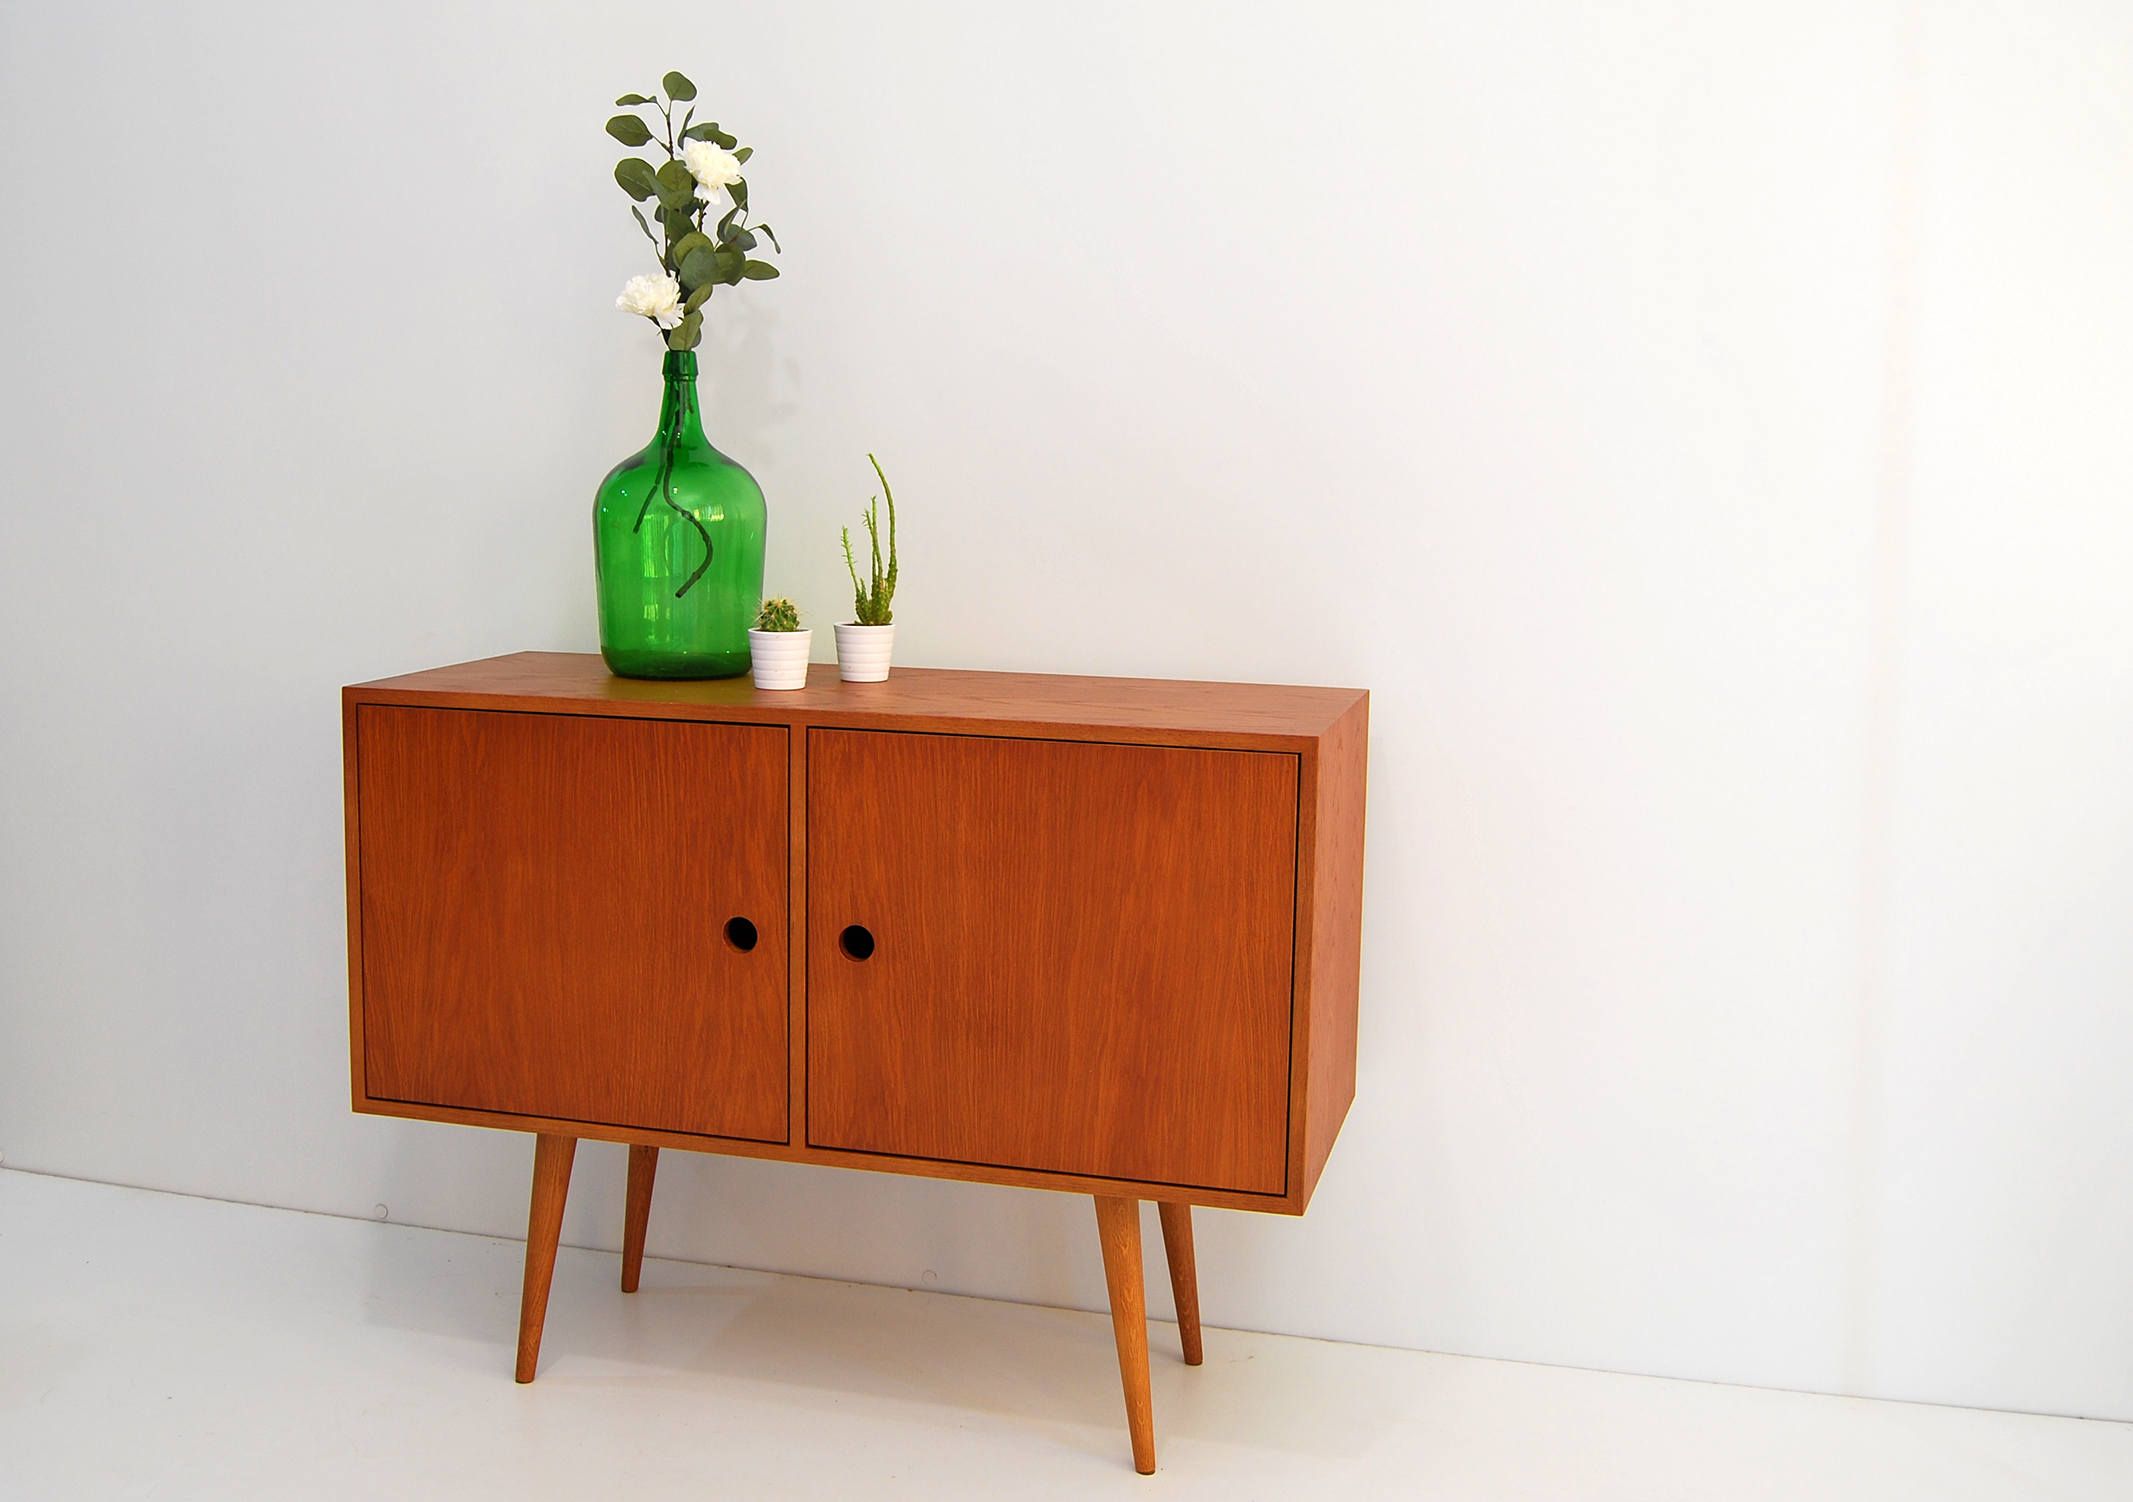 Mid Century Media Sideboard, Tv Stand, Console, Scandinavian Sideboard  Design, Retro Console, Retro Sideboard, Nordic Style With Regard To Mid Century Modern Scandinavian Style Buffets (View 13 of 30)